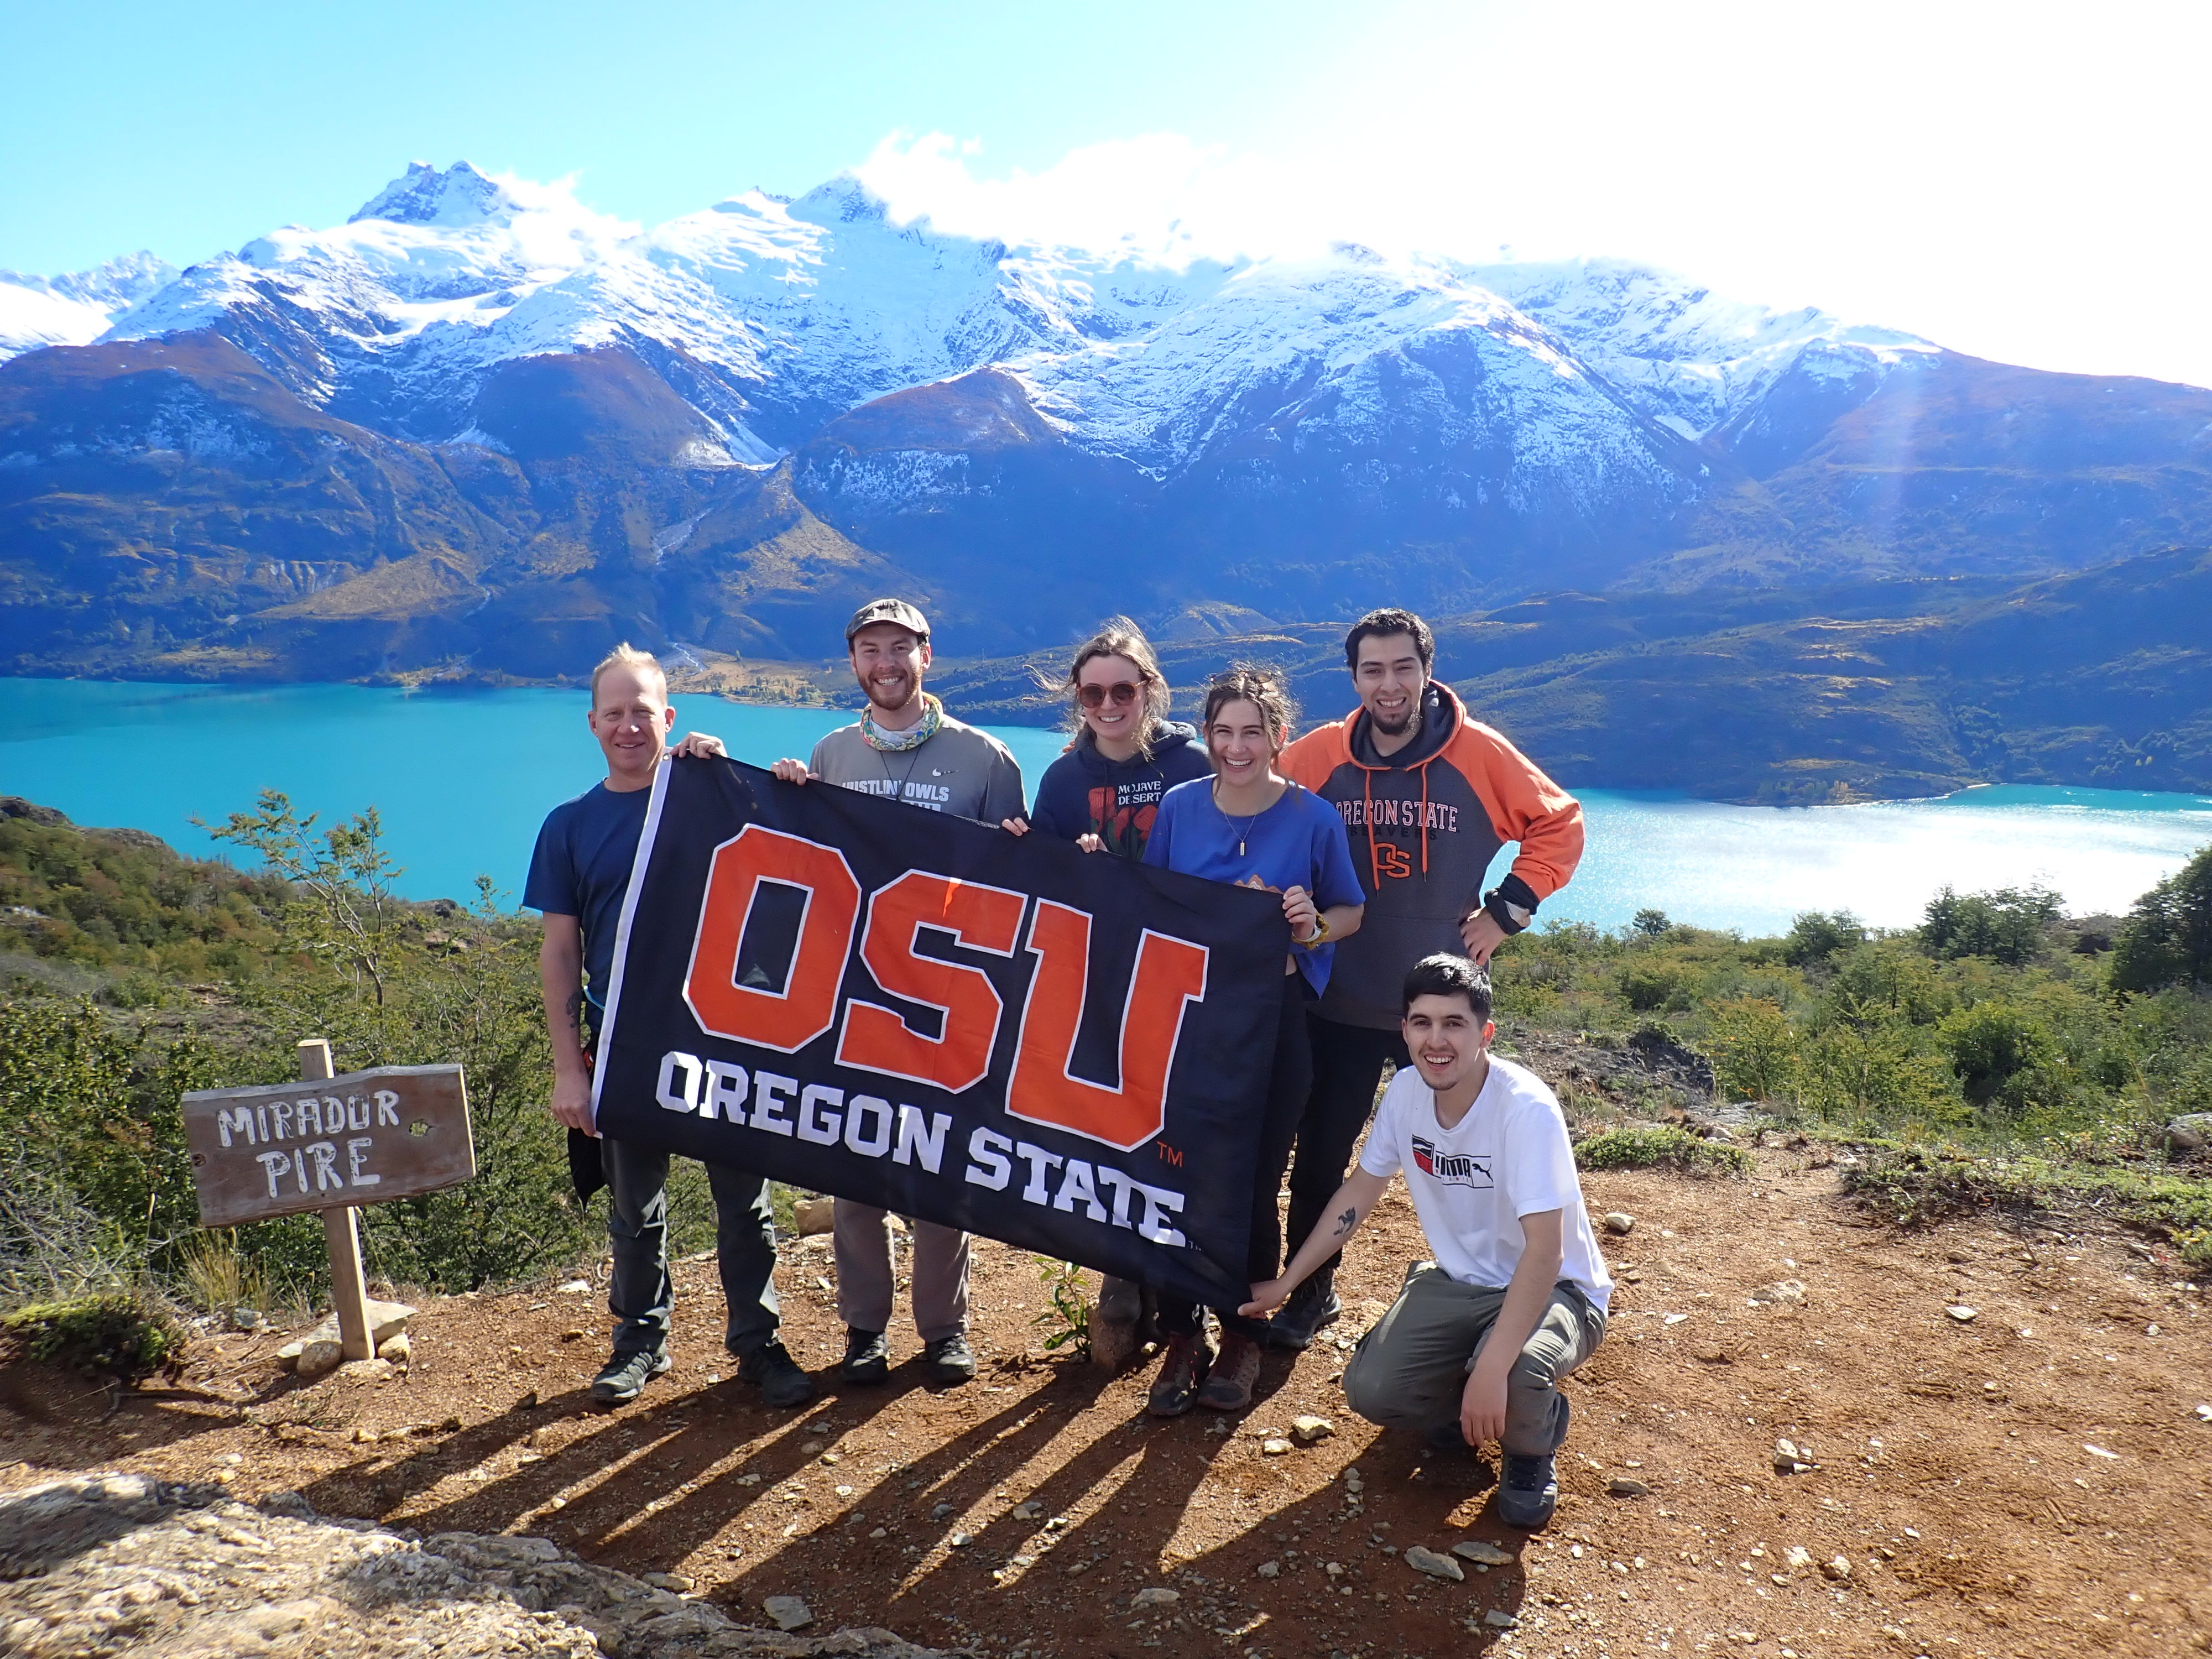 OSU students with flag standing on hill with mountain views